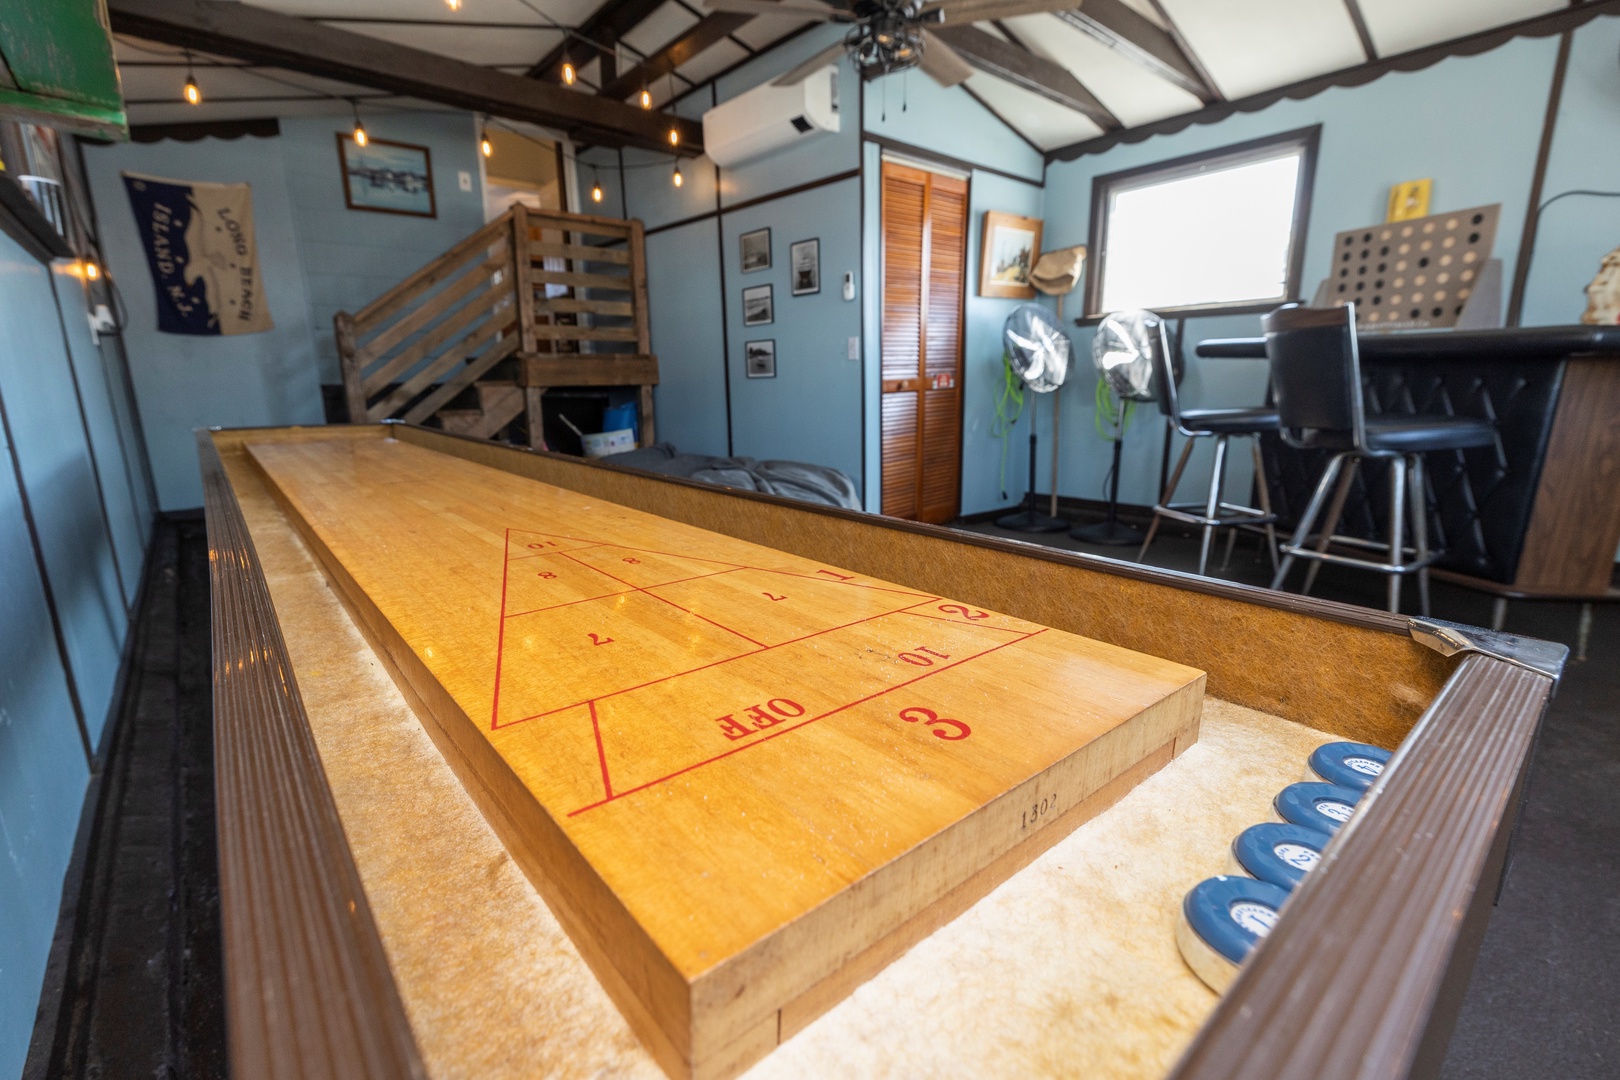 Game room with shuffleboard, TV, and bar